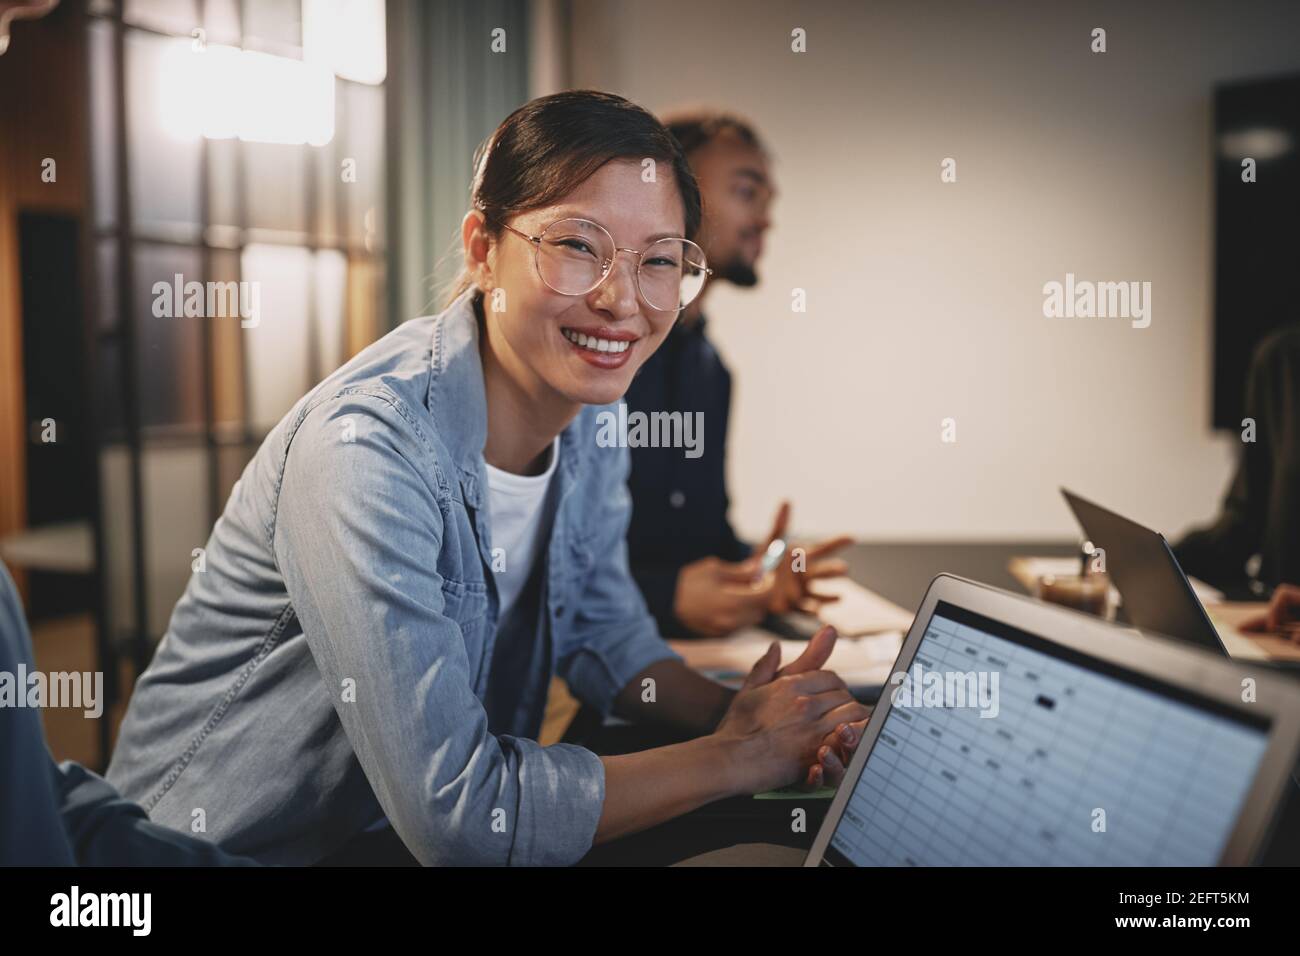 Smiling young Asian businesswoman leaning on a table during a meeting with a colleagues in an office Stock Photo